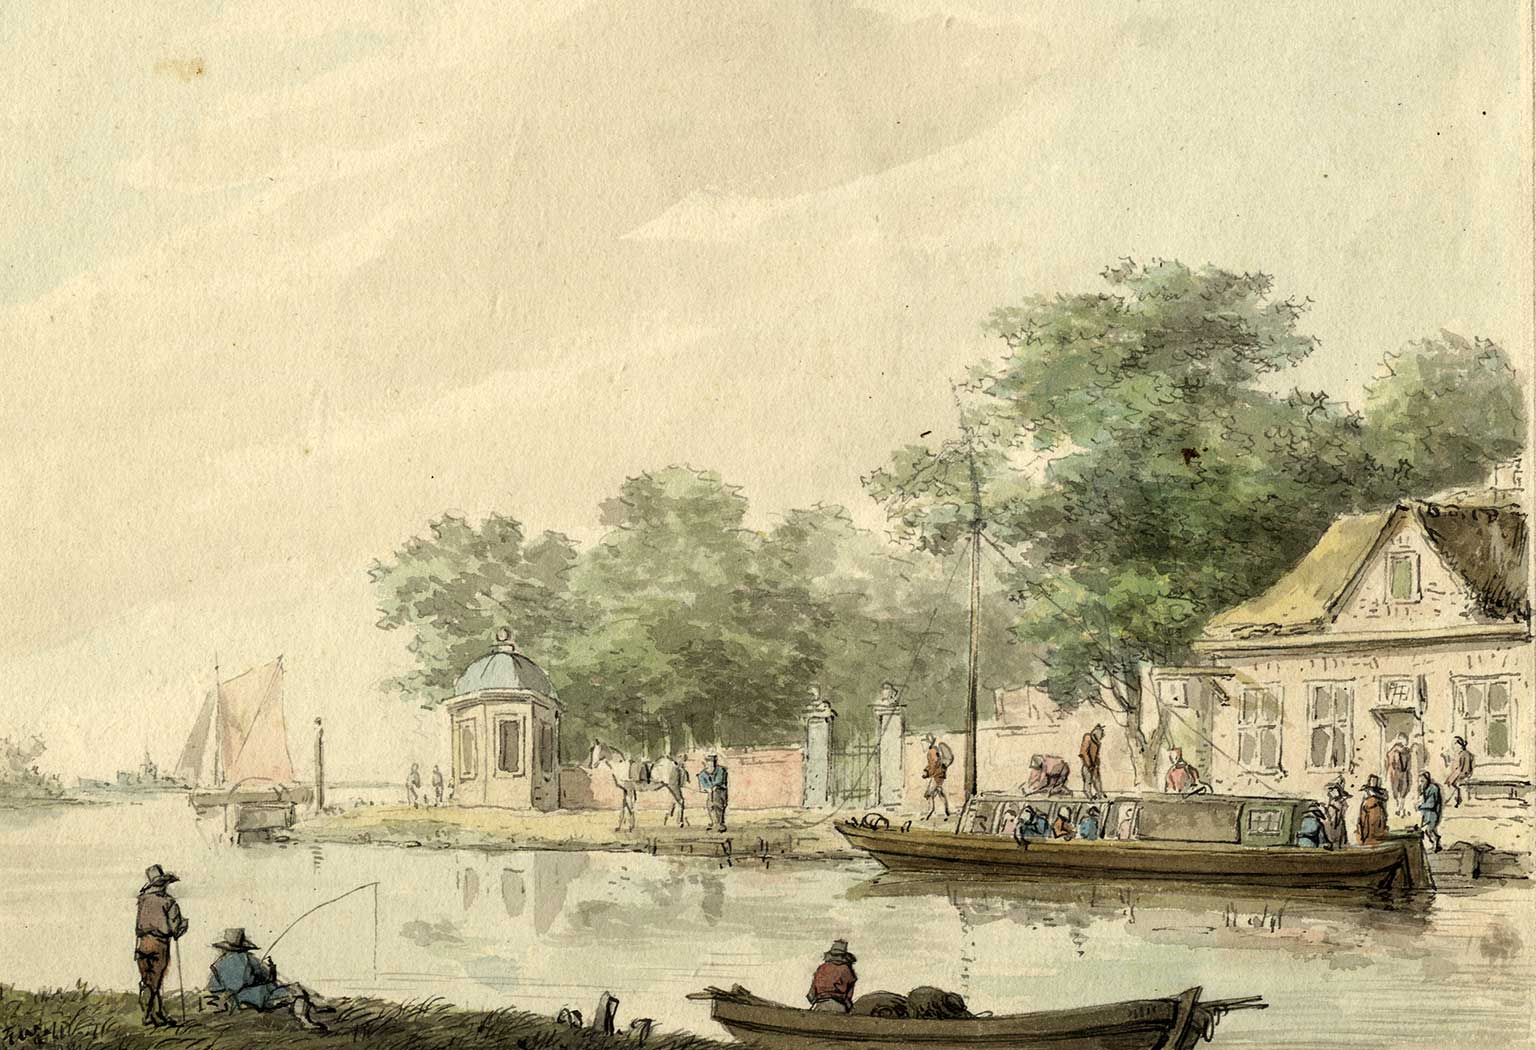 Draw barge in a river in Holland around 1750-1800